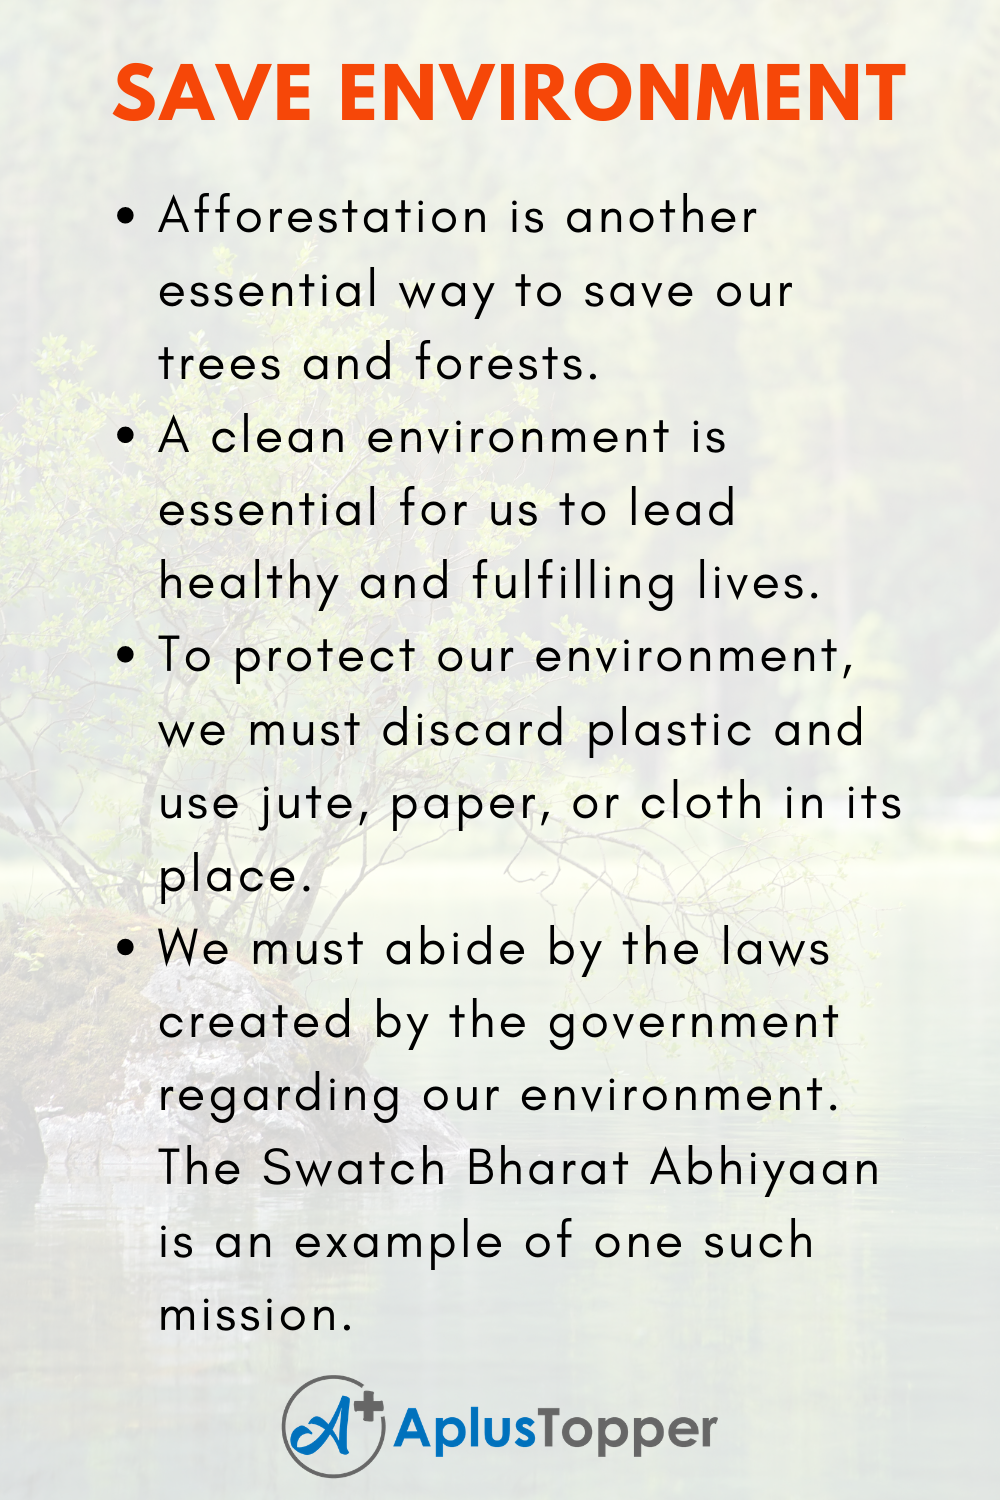 essay on save environment for future in 1500 words